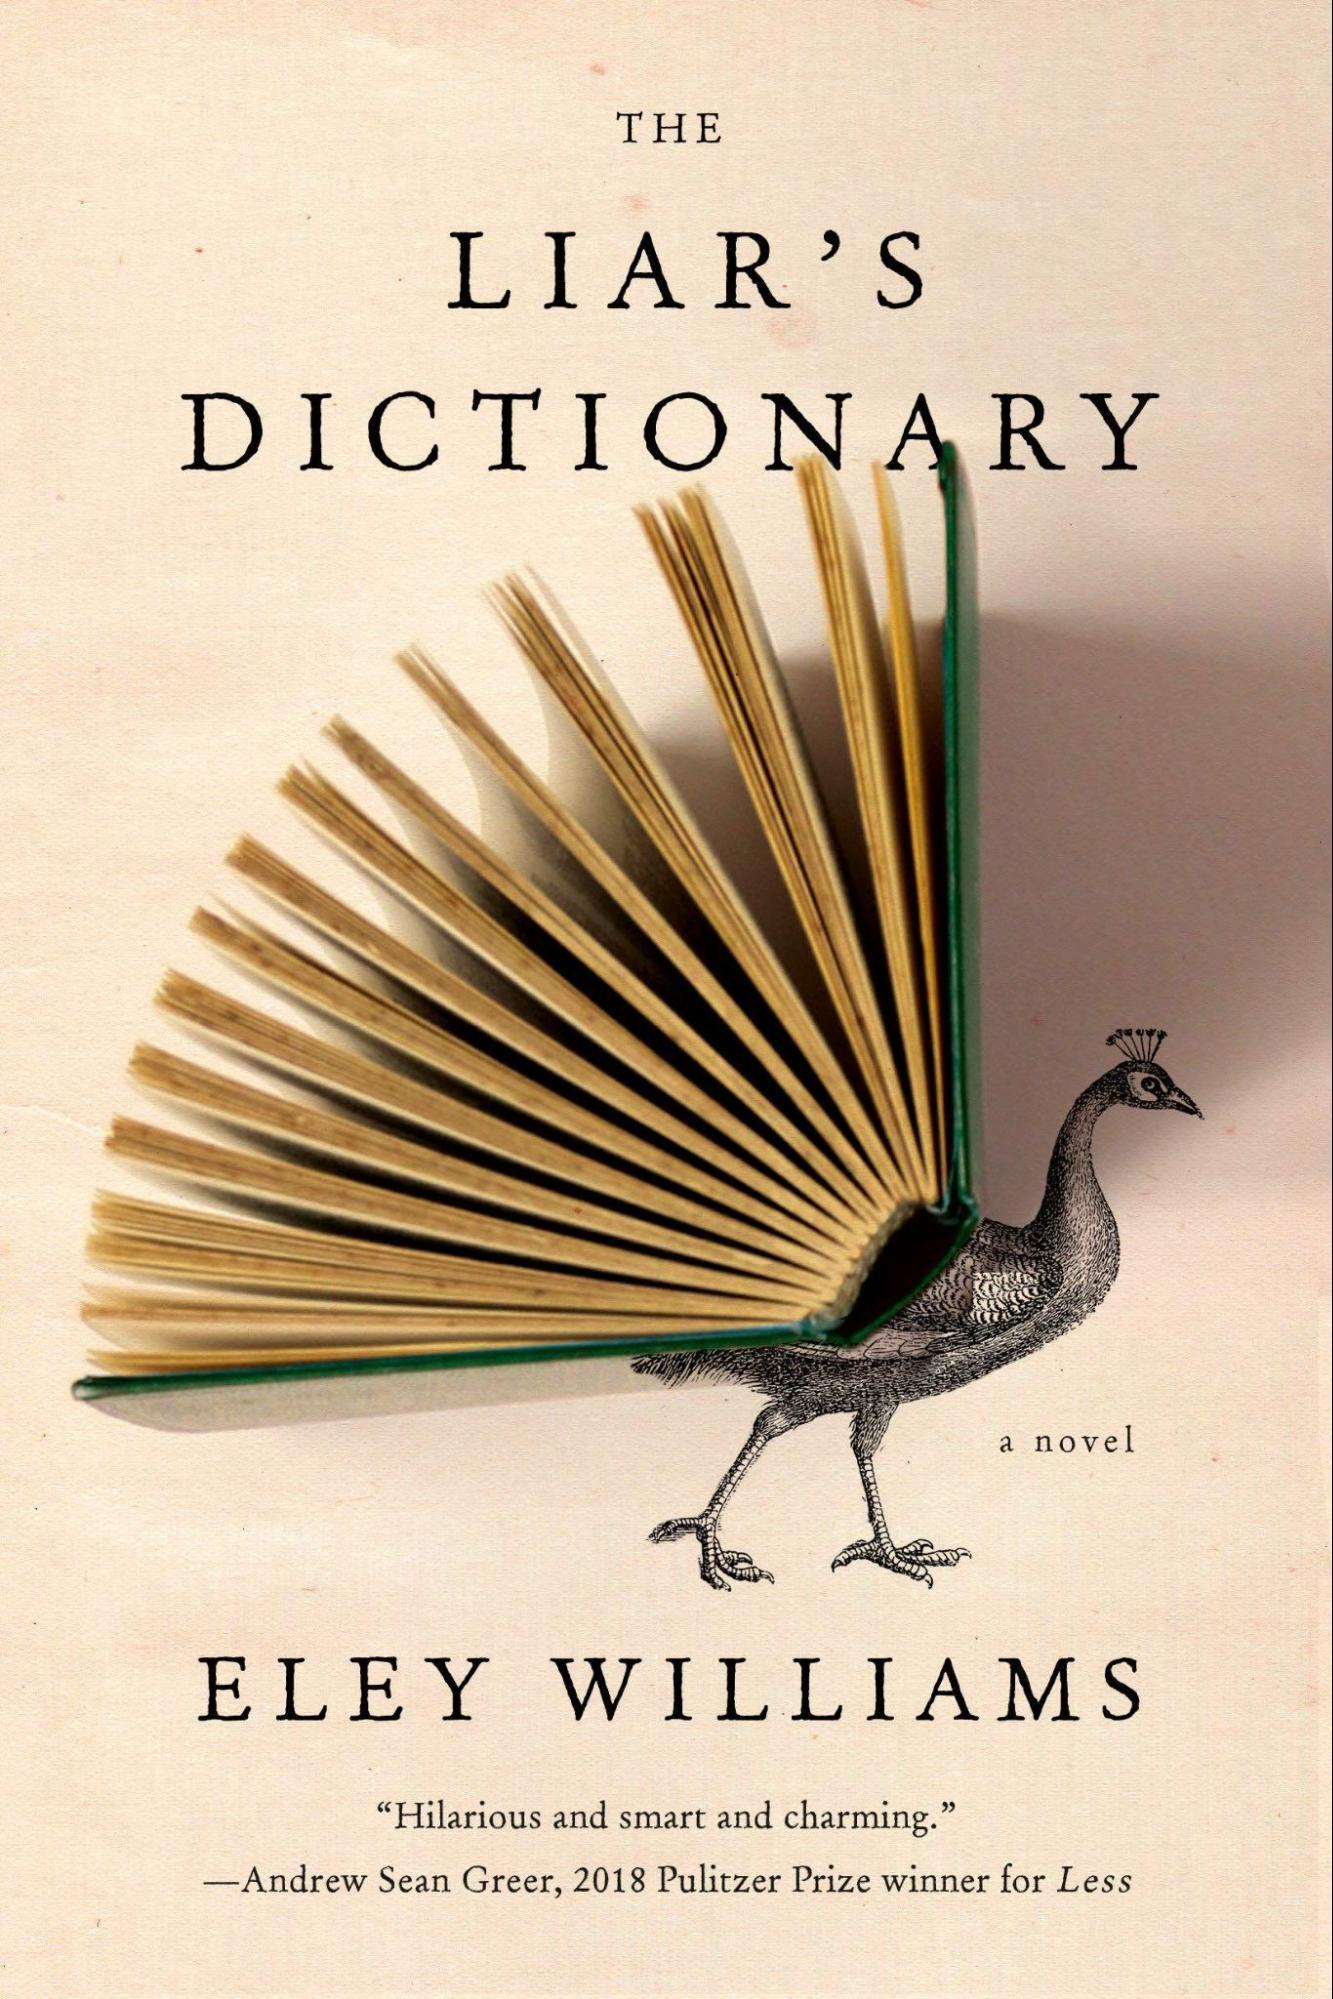 The Liar’s Dictionary by Eley Williams